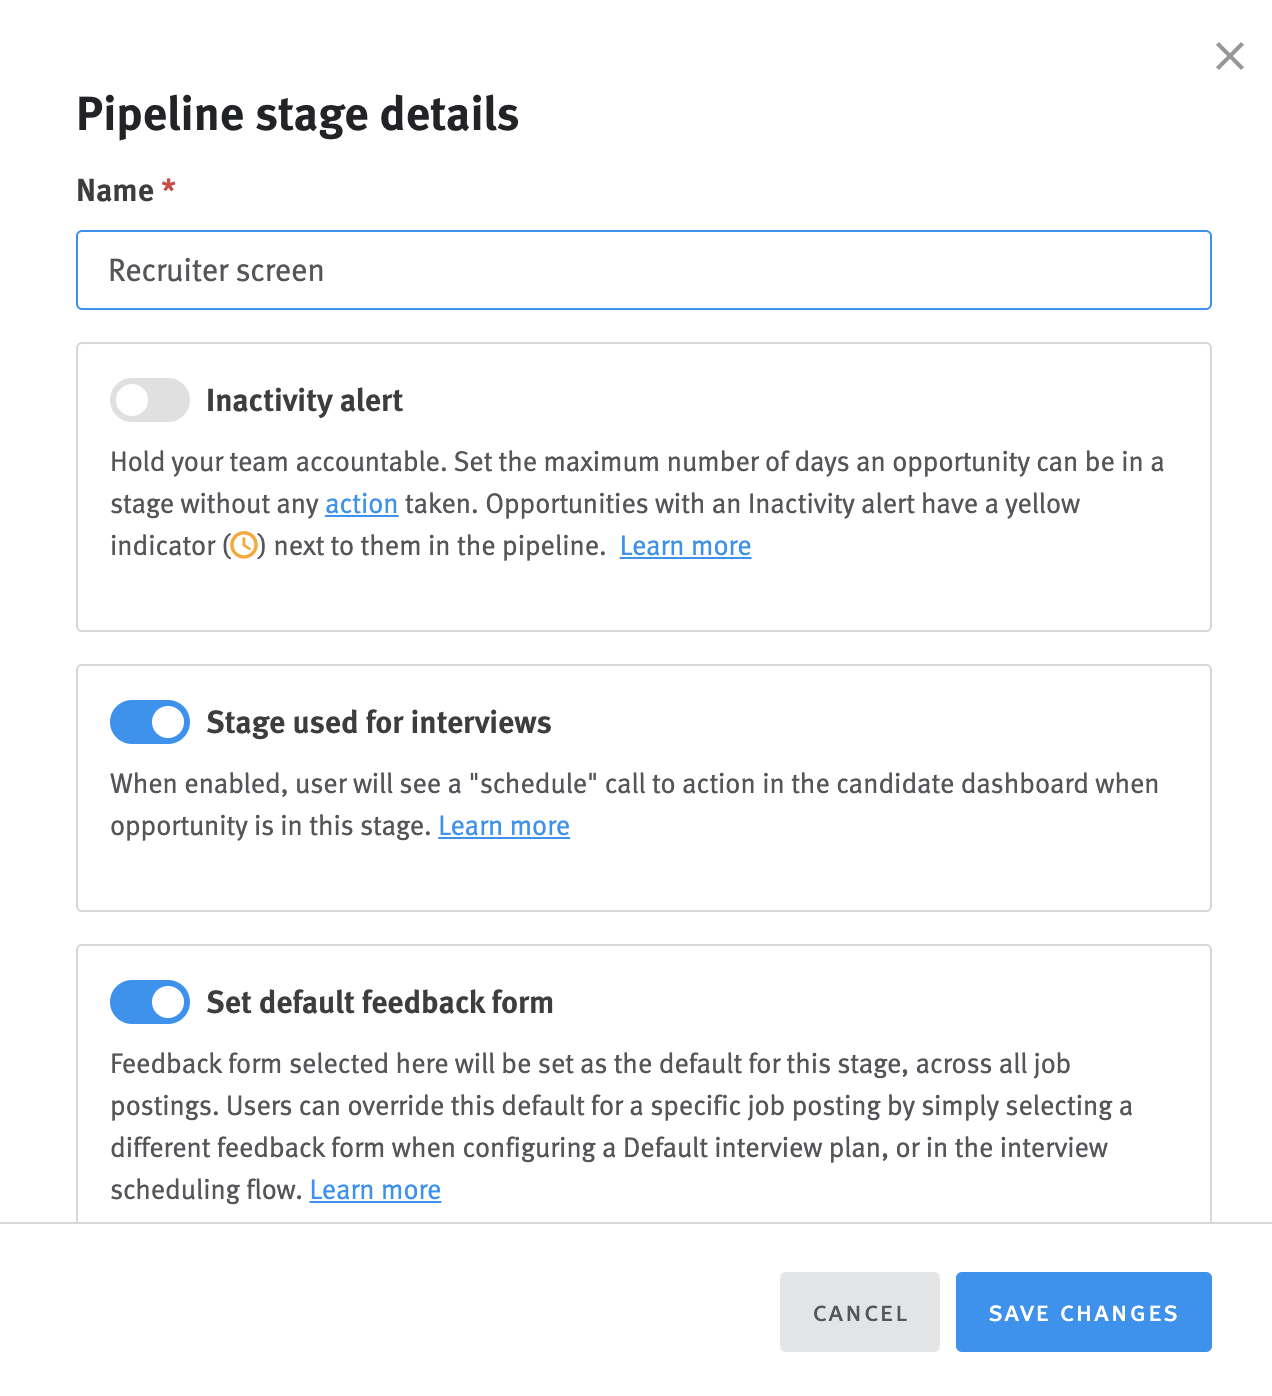 Pipeline stage details modal